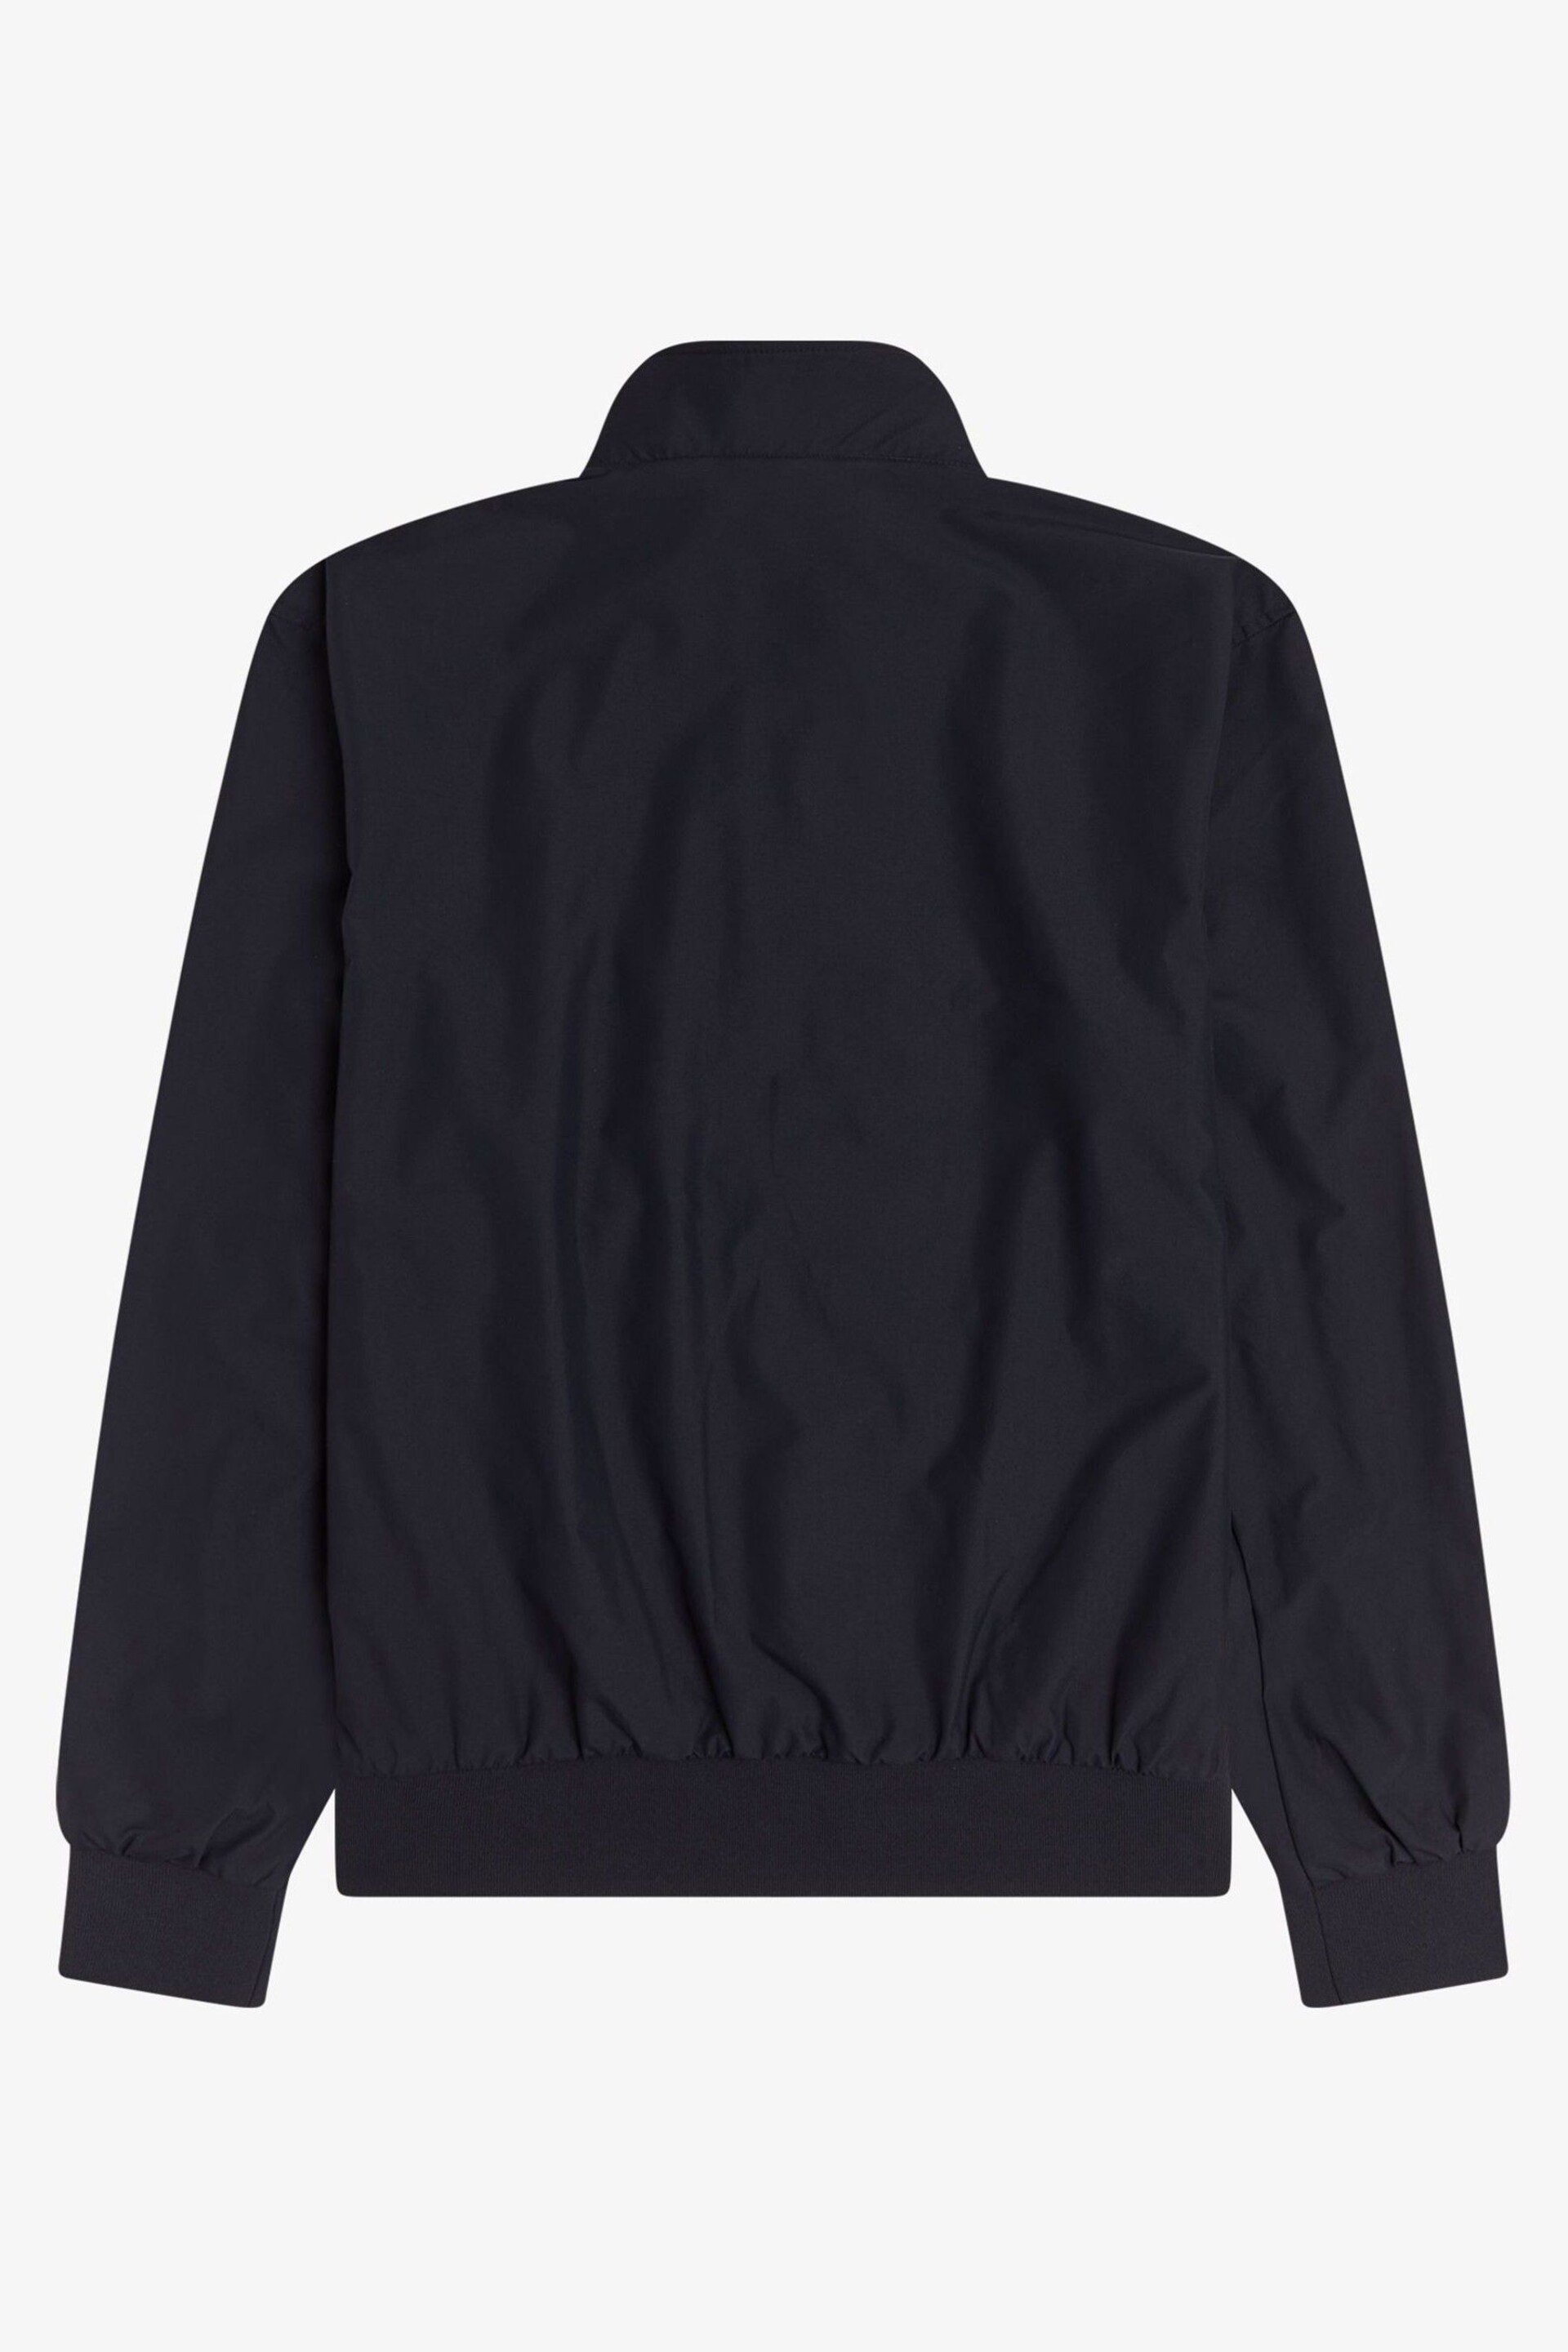 Fred Perry Brentham Sports Jacket - Image 9 of 9